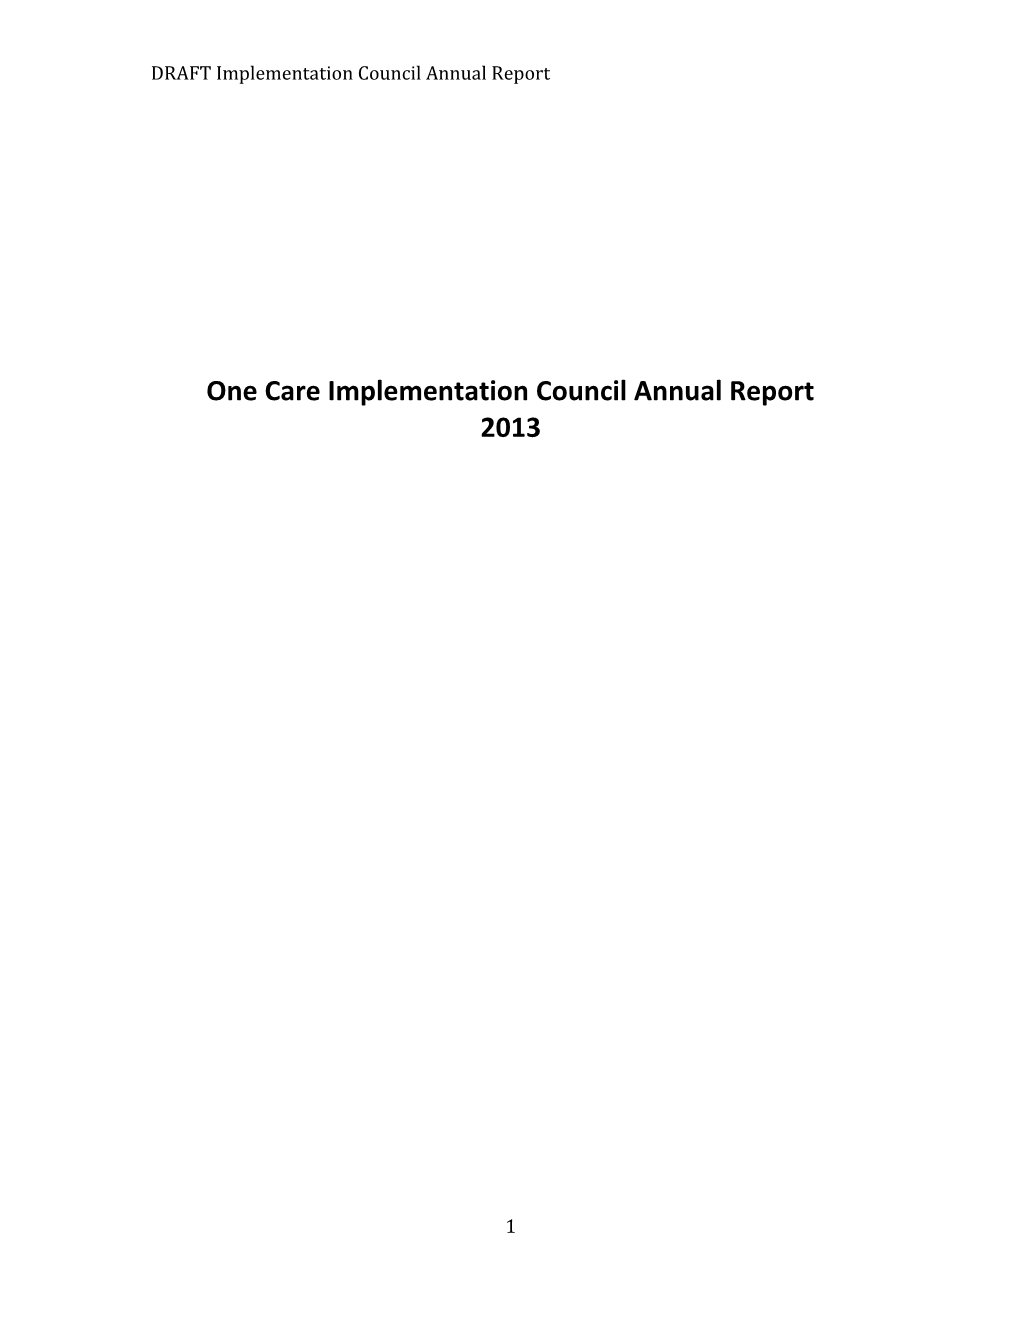 One Care Implementation Council Annual Report s1